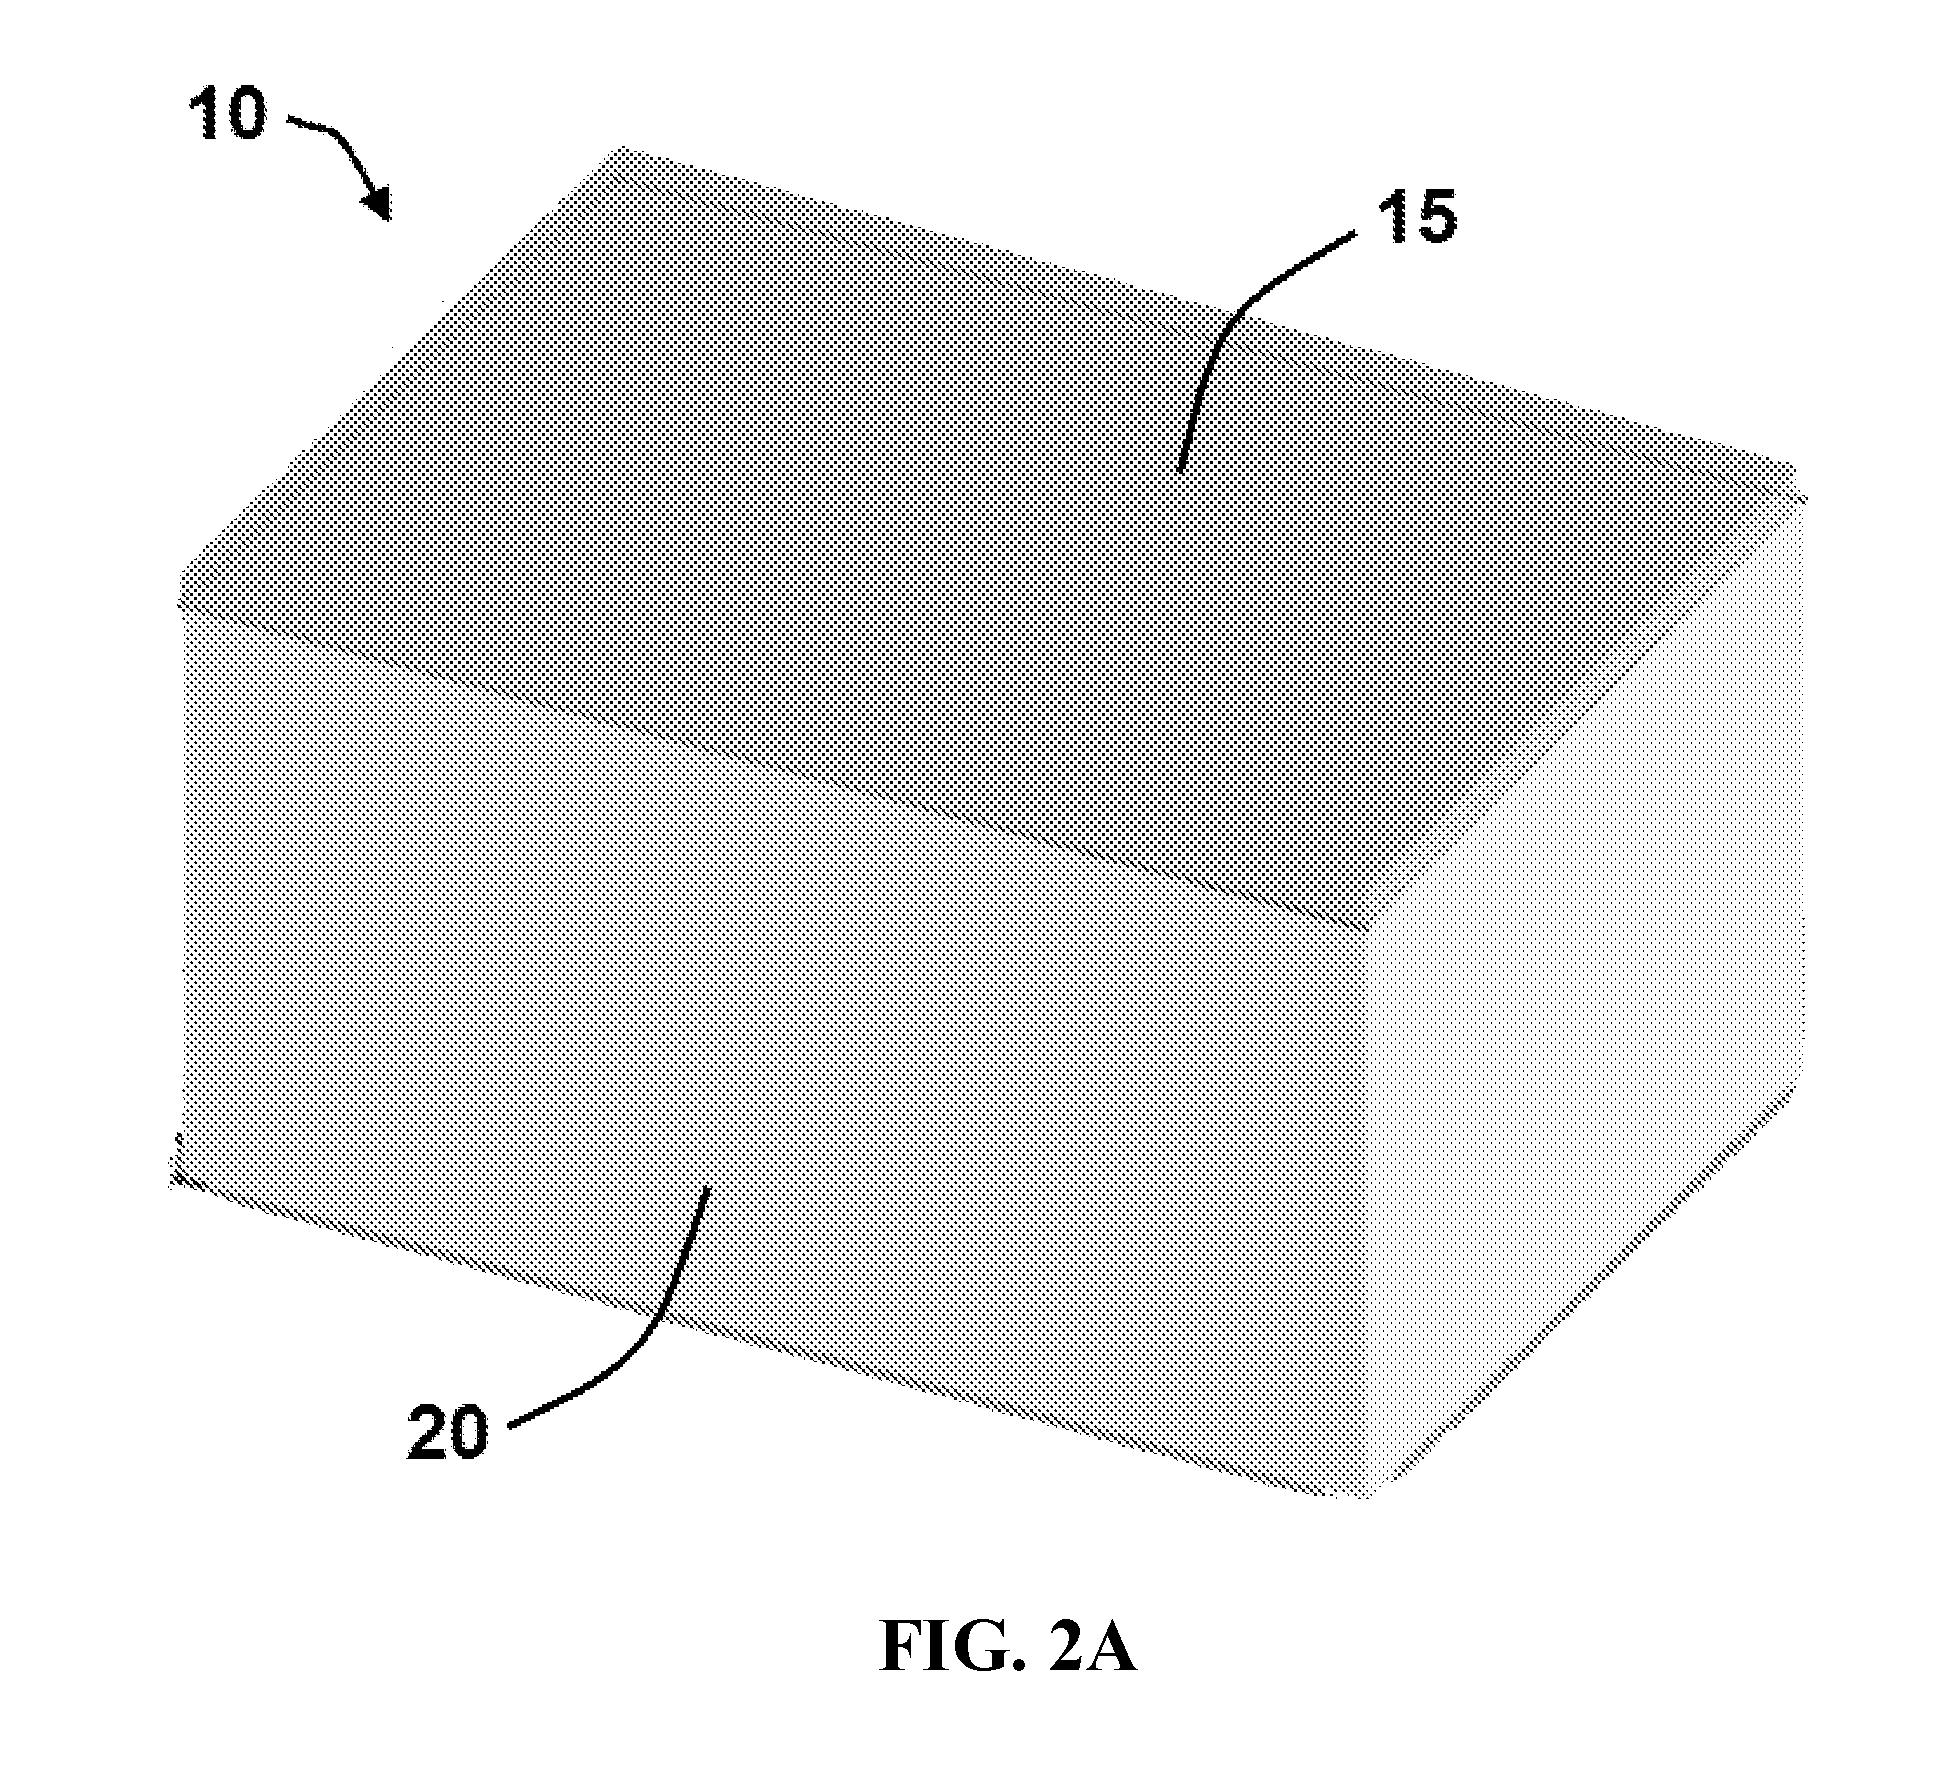 Nanochanneled device and related methods